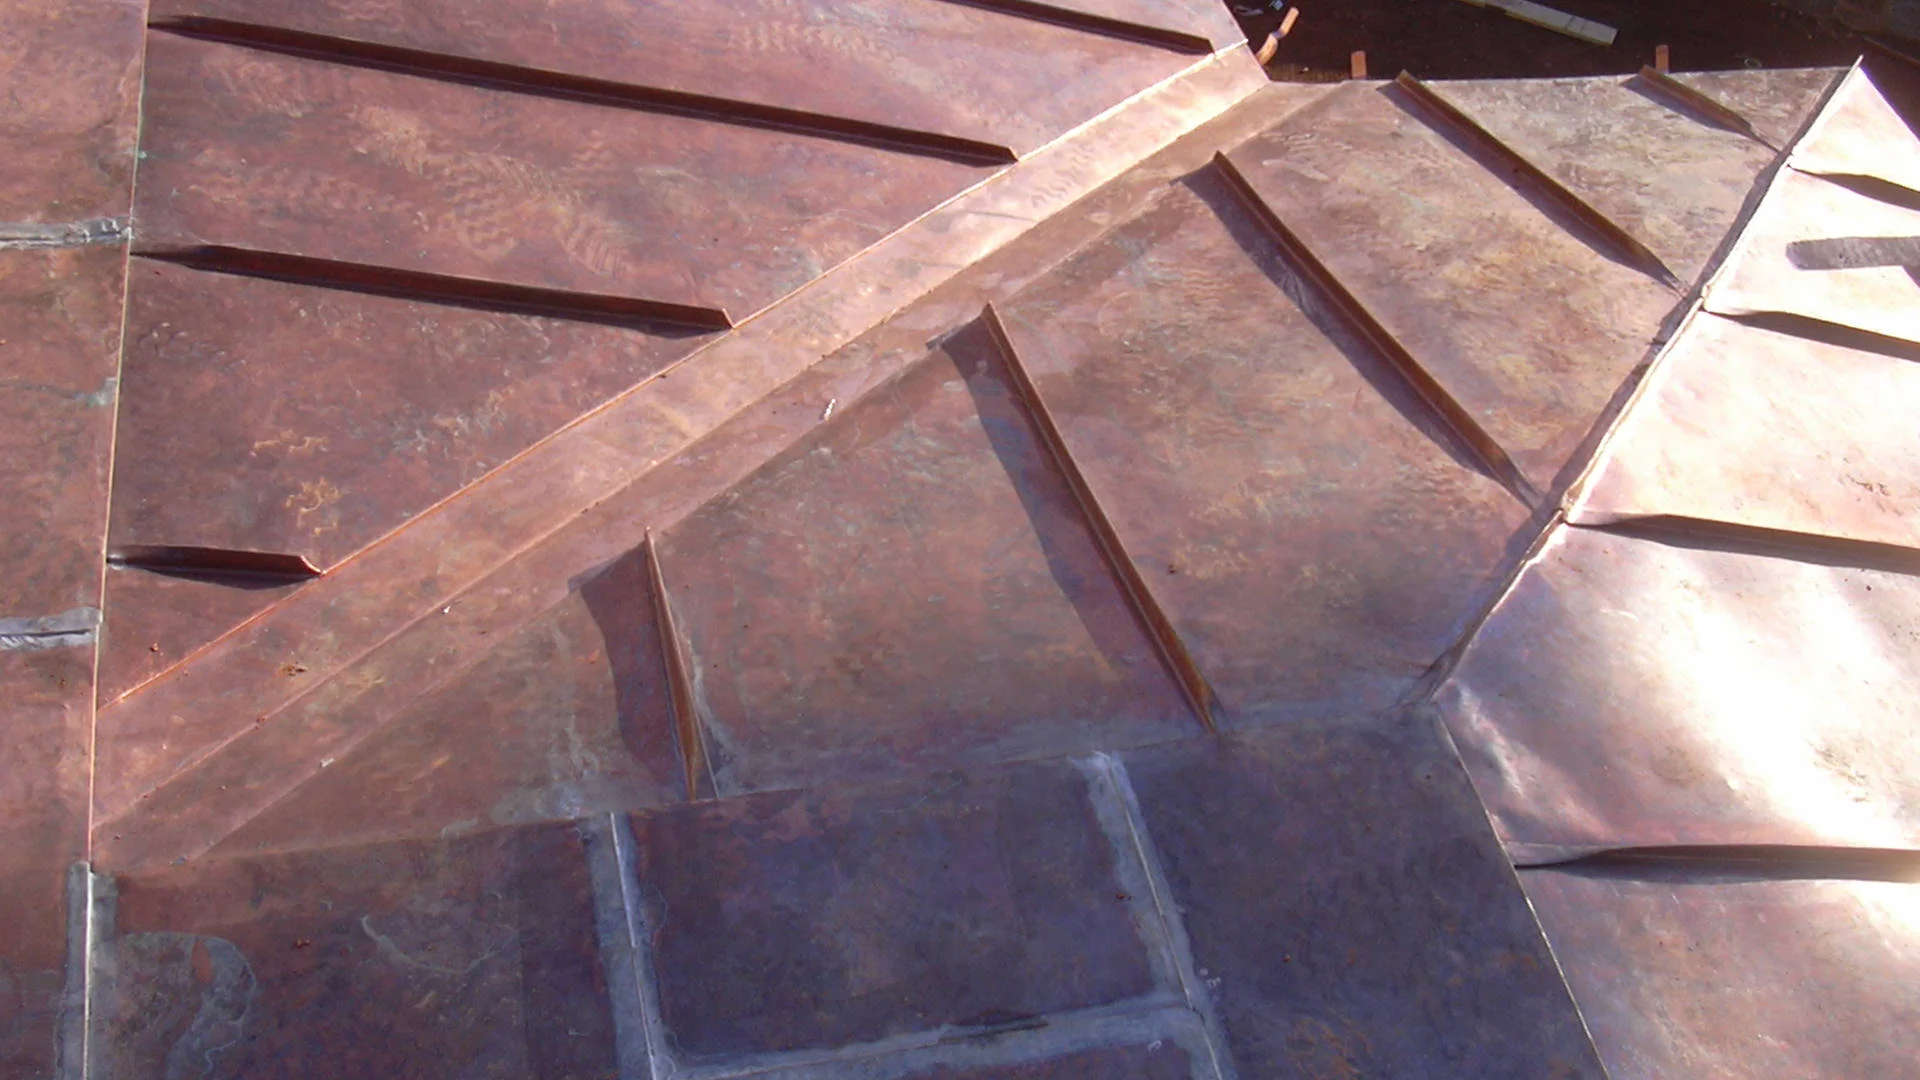 Flat locked and standing seam copper panels